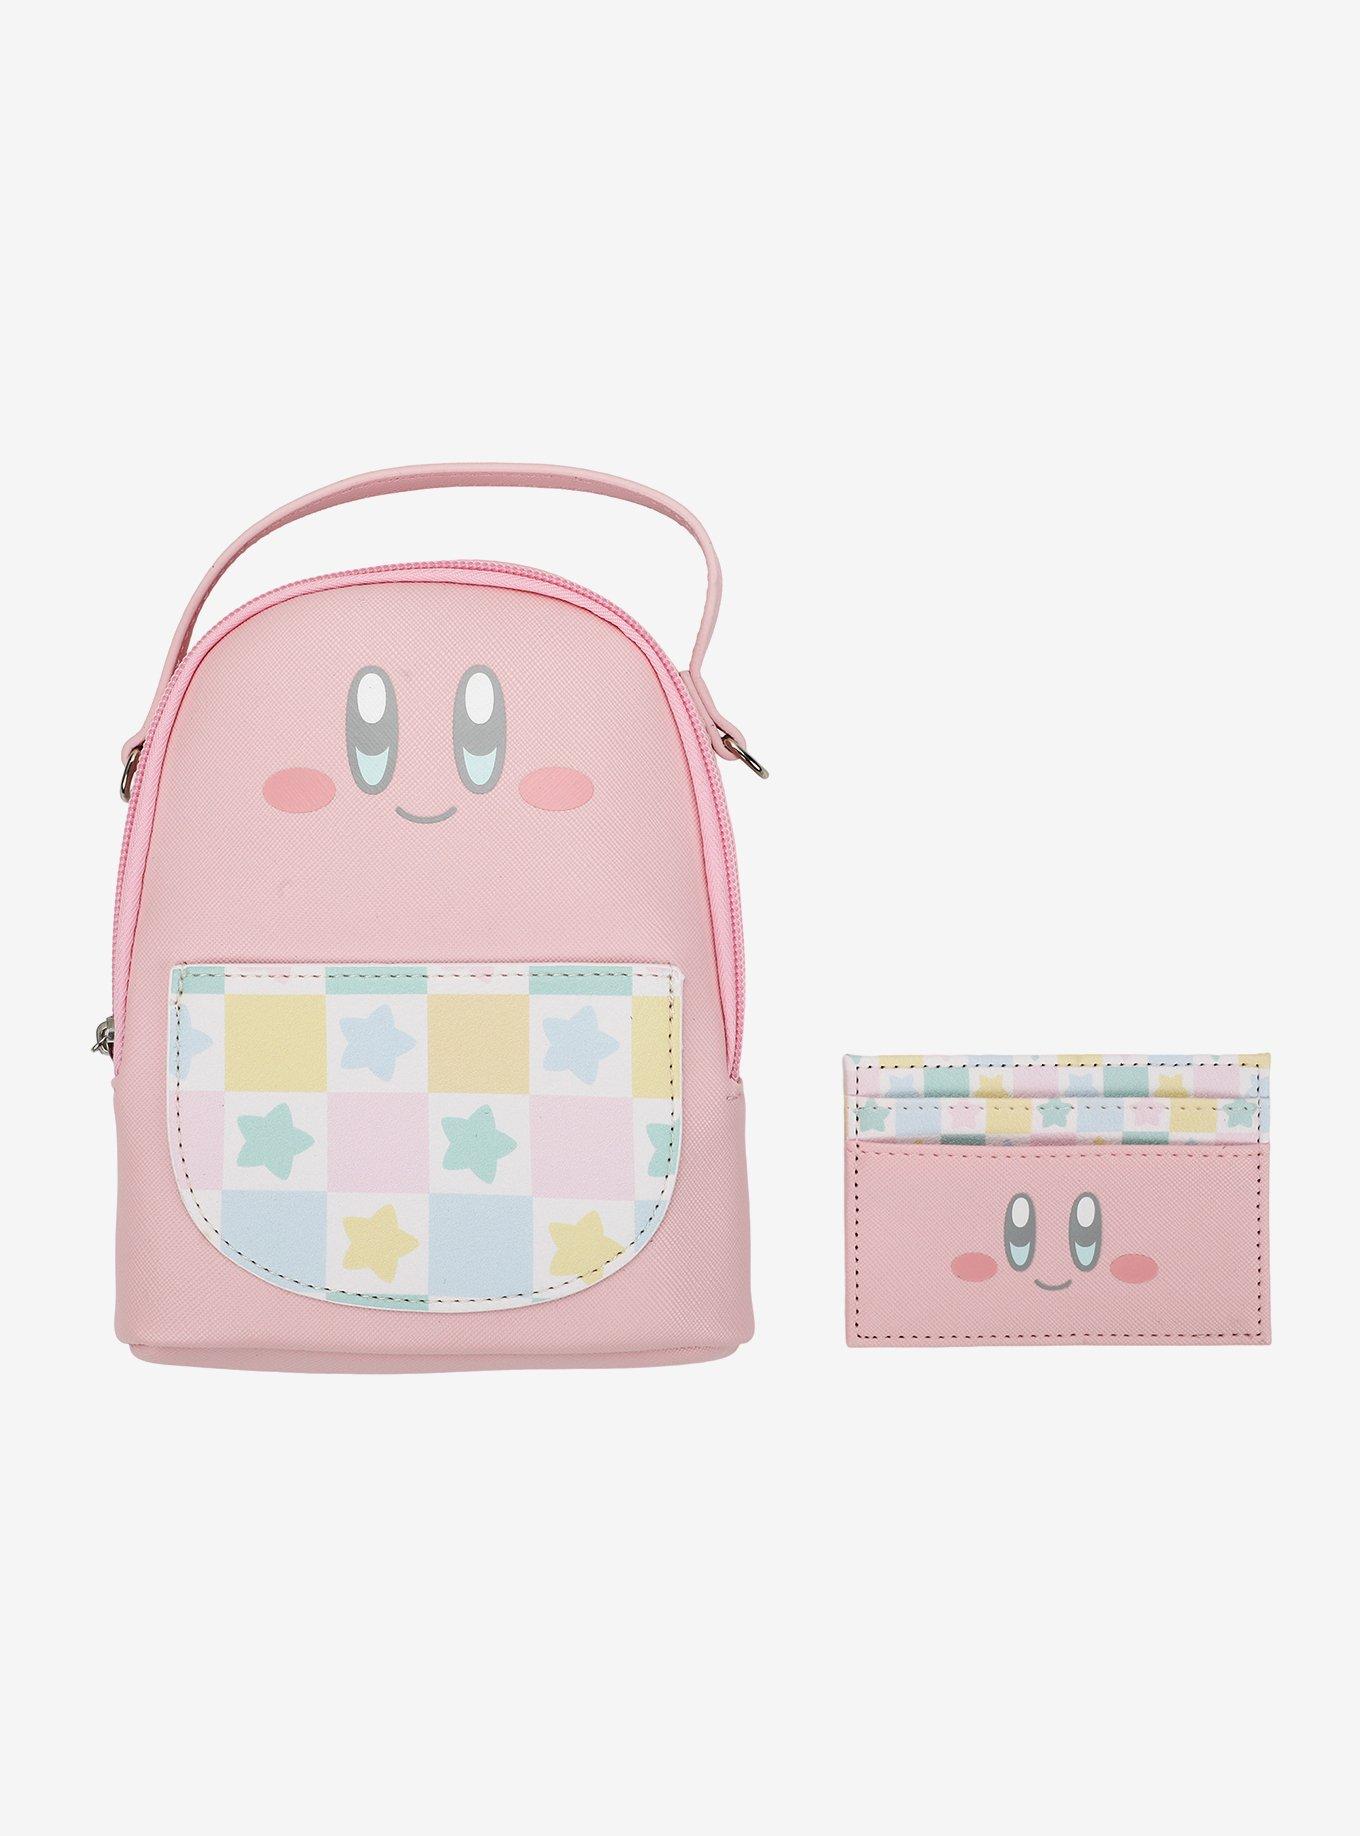 Nintendo Kirby Character Coin Pouch